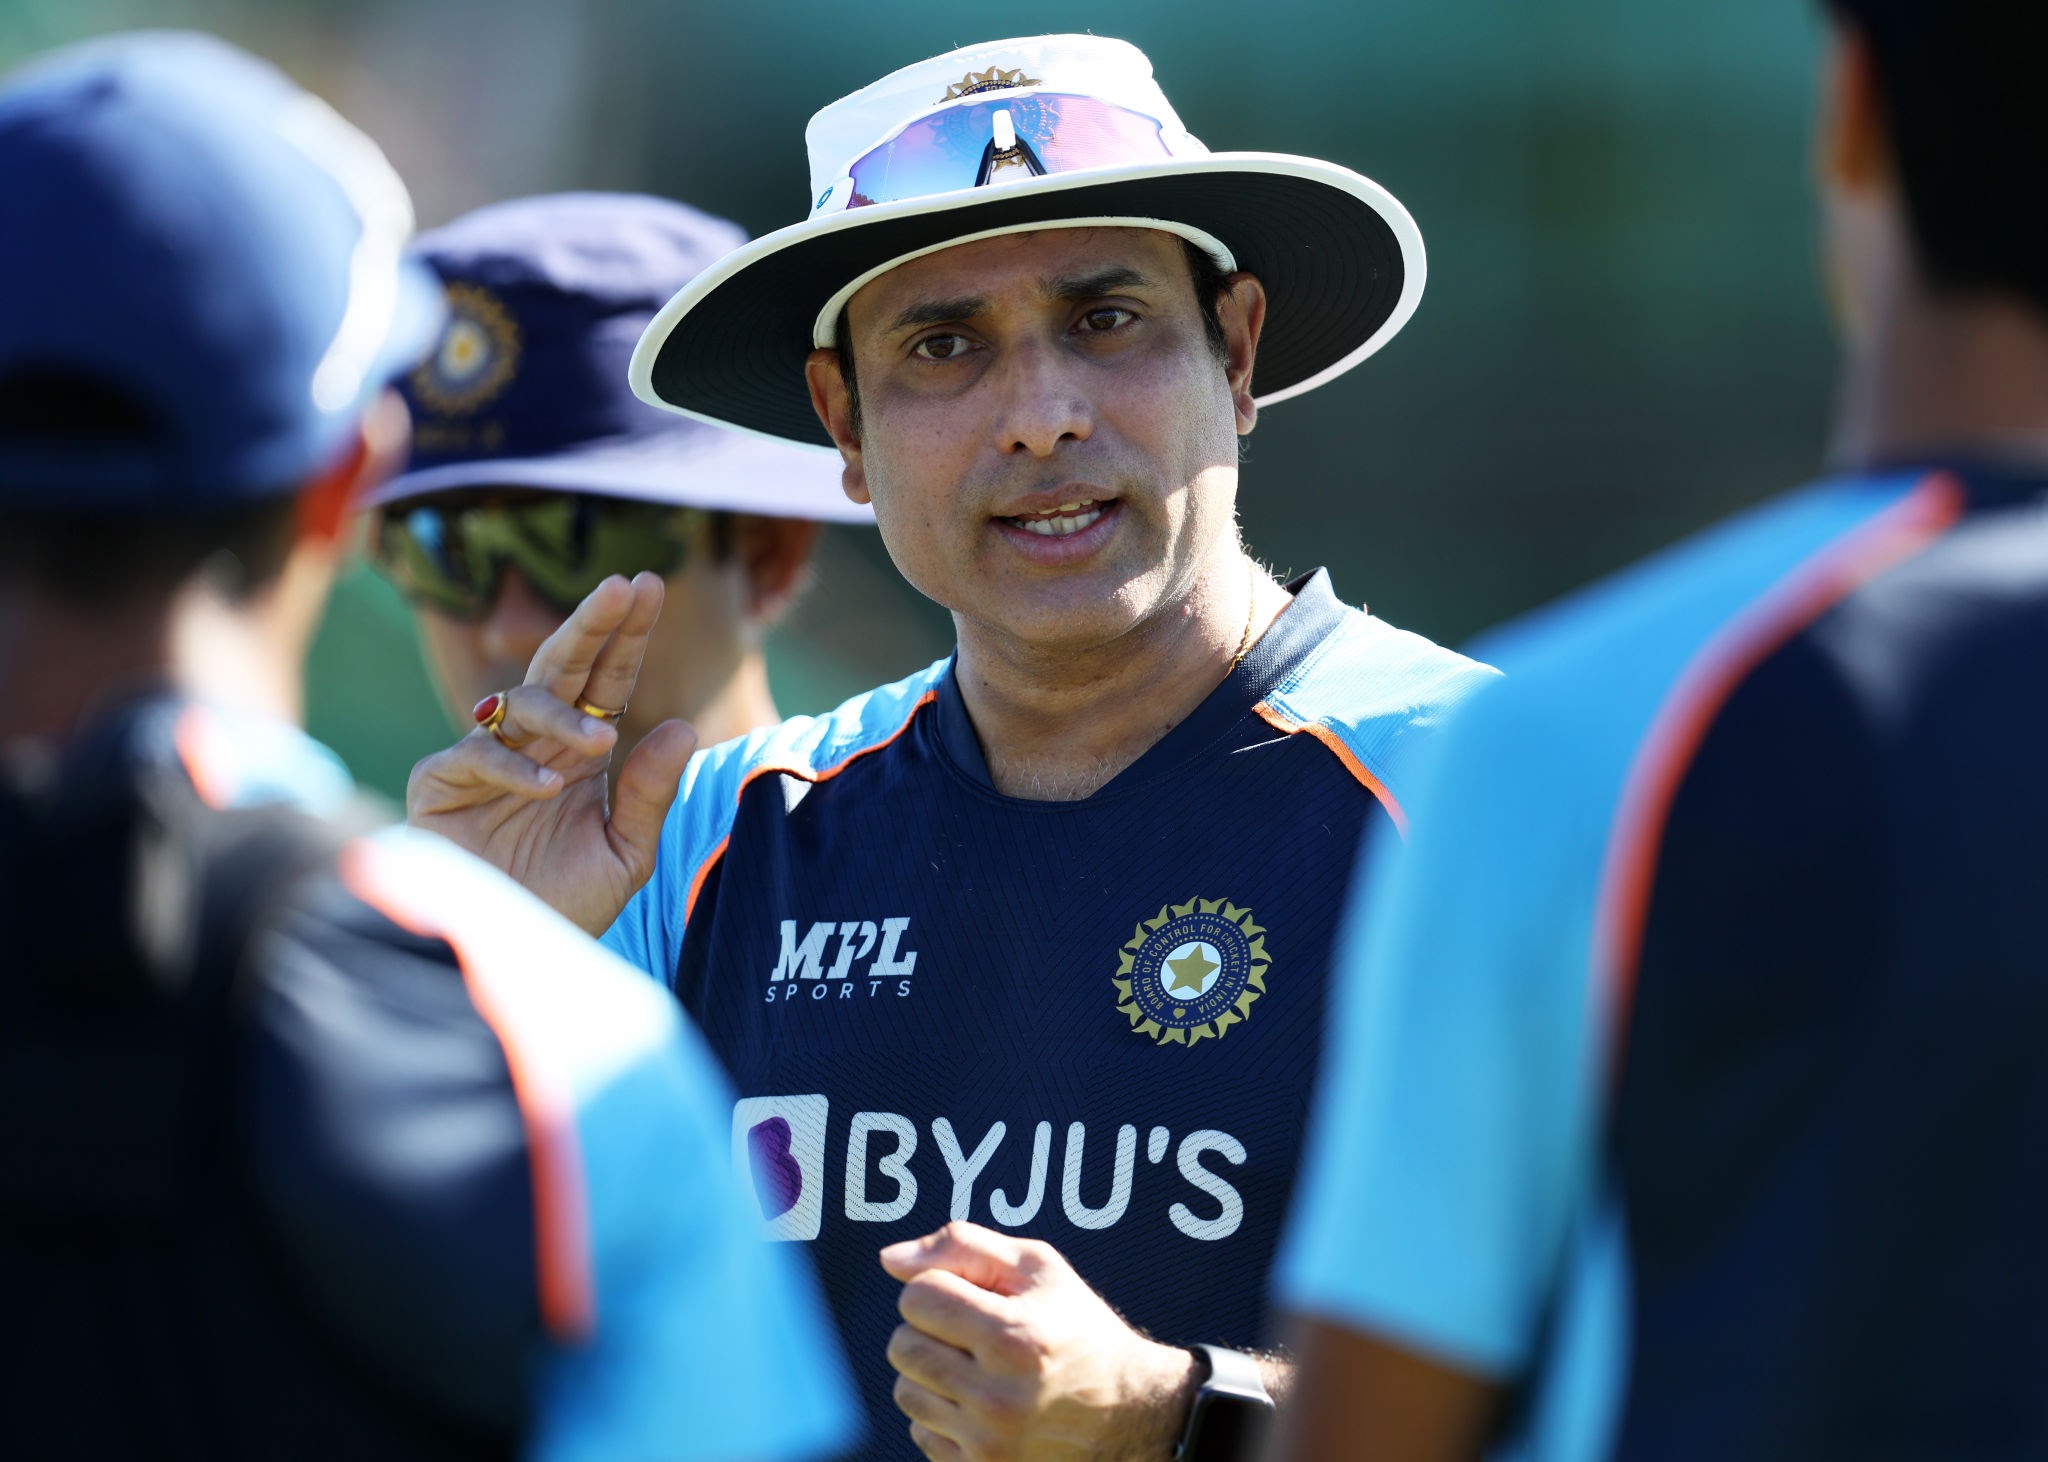 “T20 Is An Ideal Format To Be Part Of The Olympics” – VVS Laxman